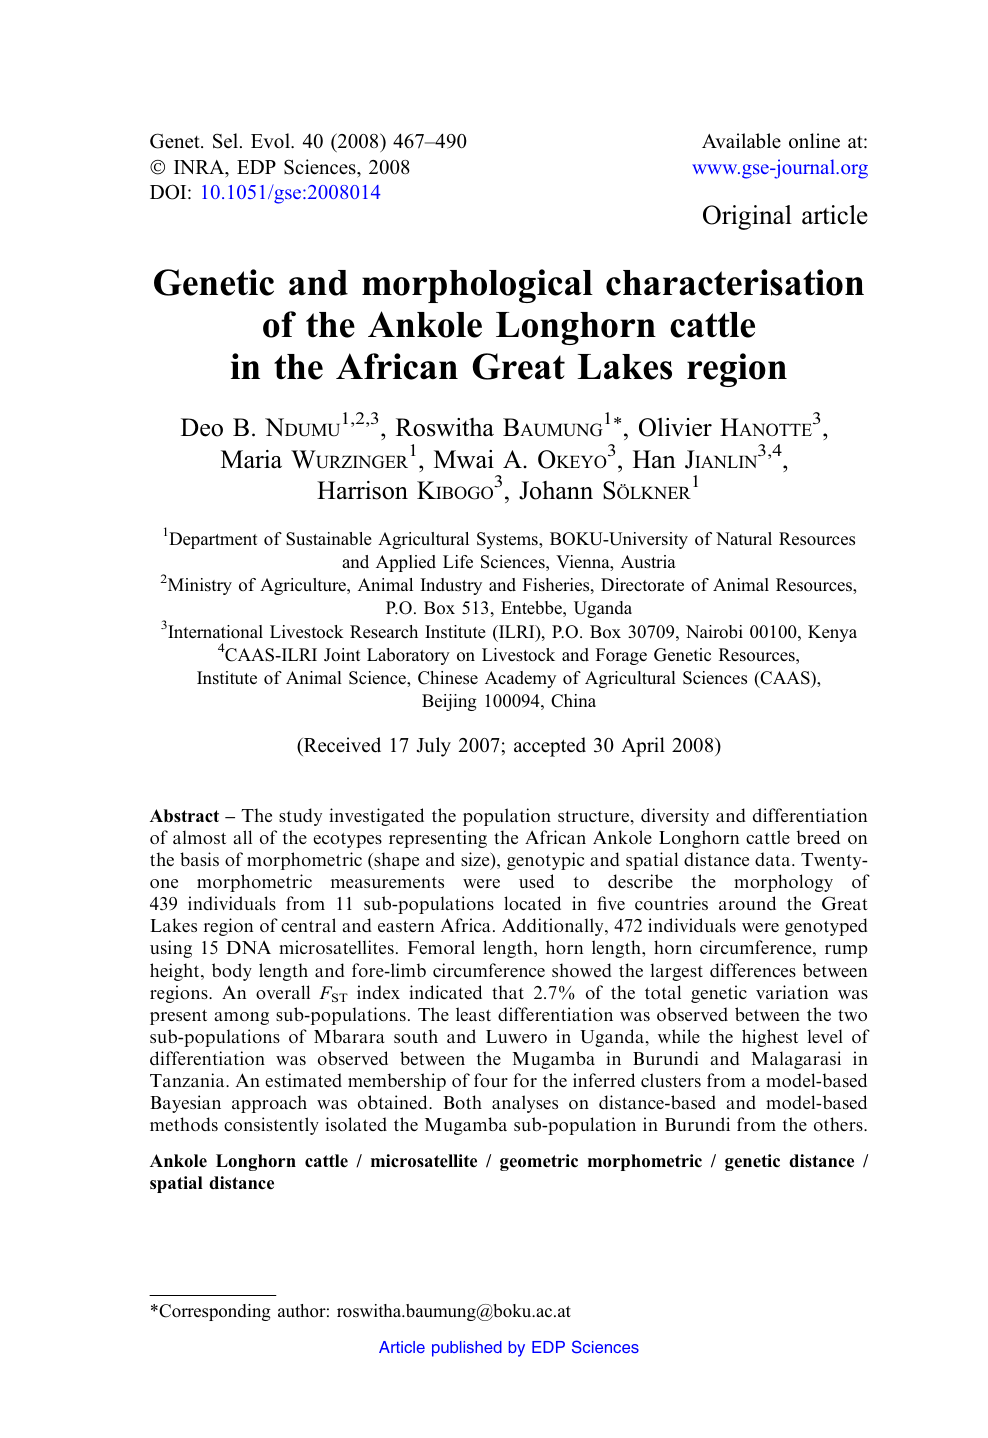 Genetic and morphological characterisation of the Ankole Longhorn cattle in  the African Great Lakes region – topic of research paper in Biological  sciences. Download scholarly article PDF and read for free on